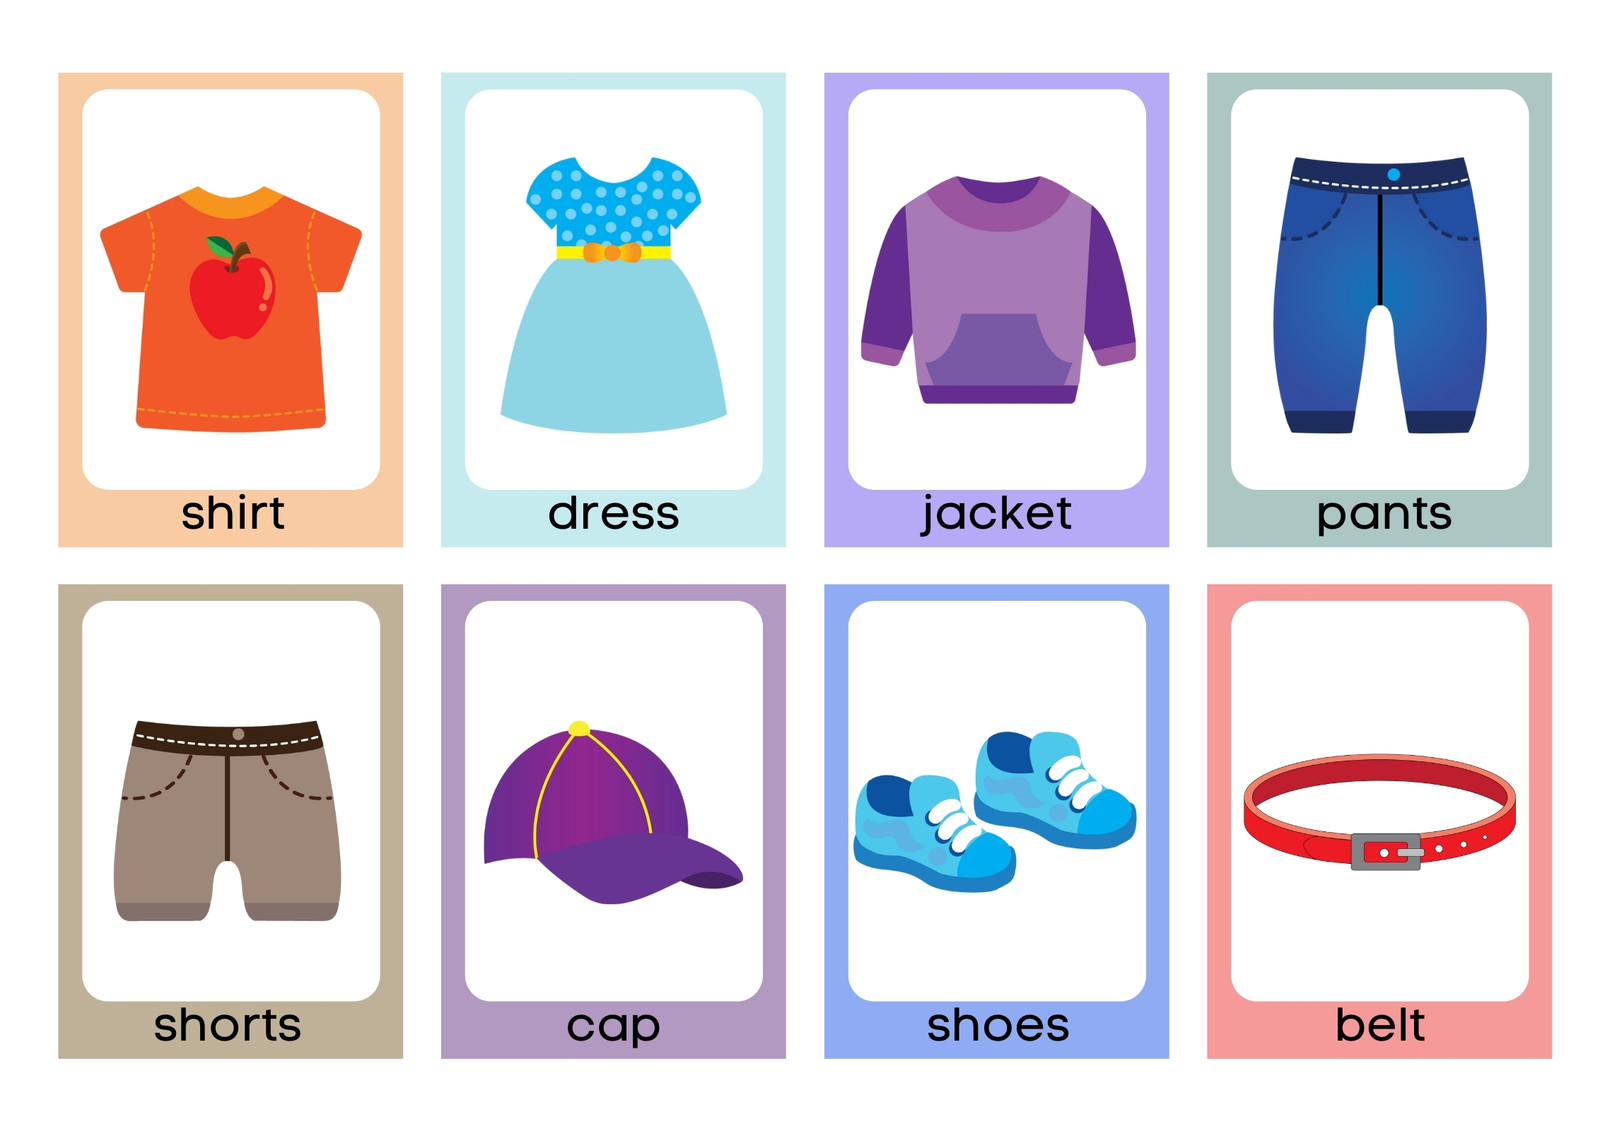 Winter Clothes & Accessories Vocabulary Worksheet - Templates by Canva